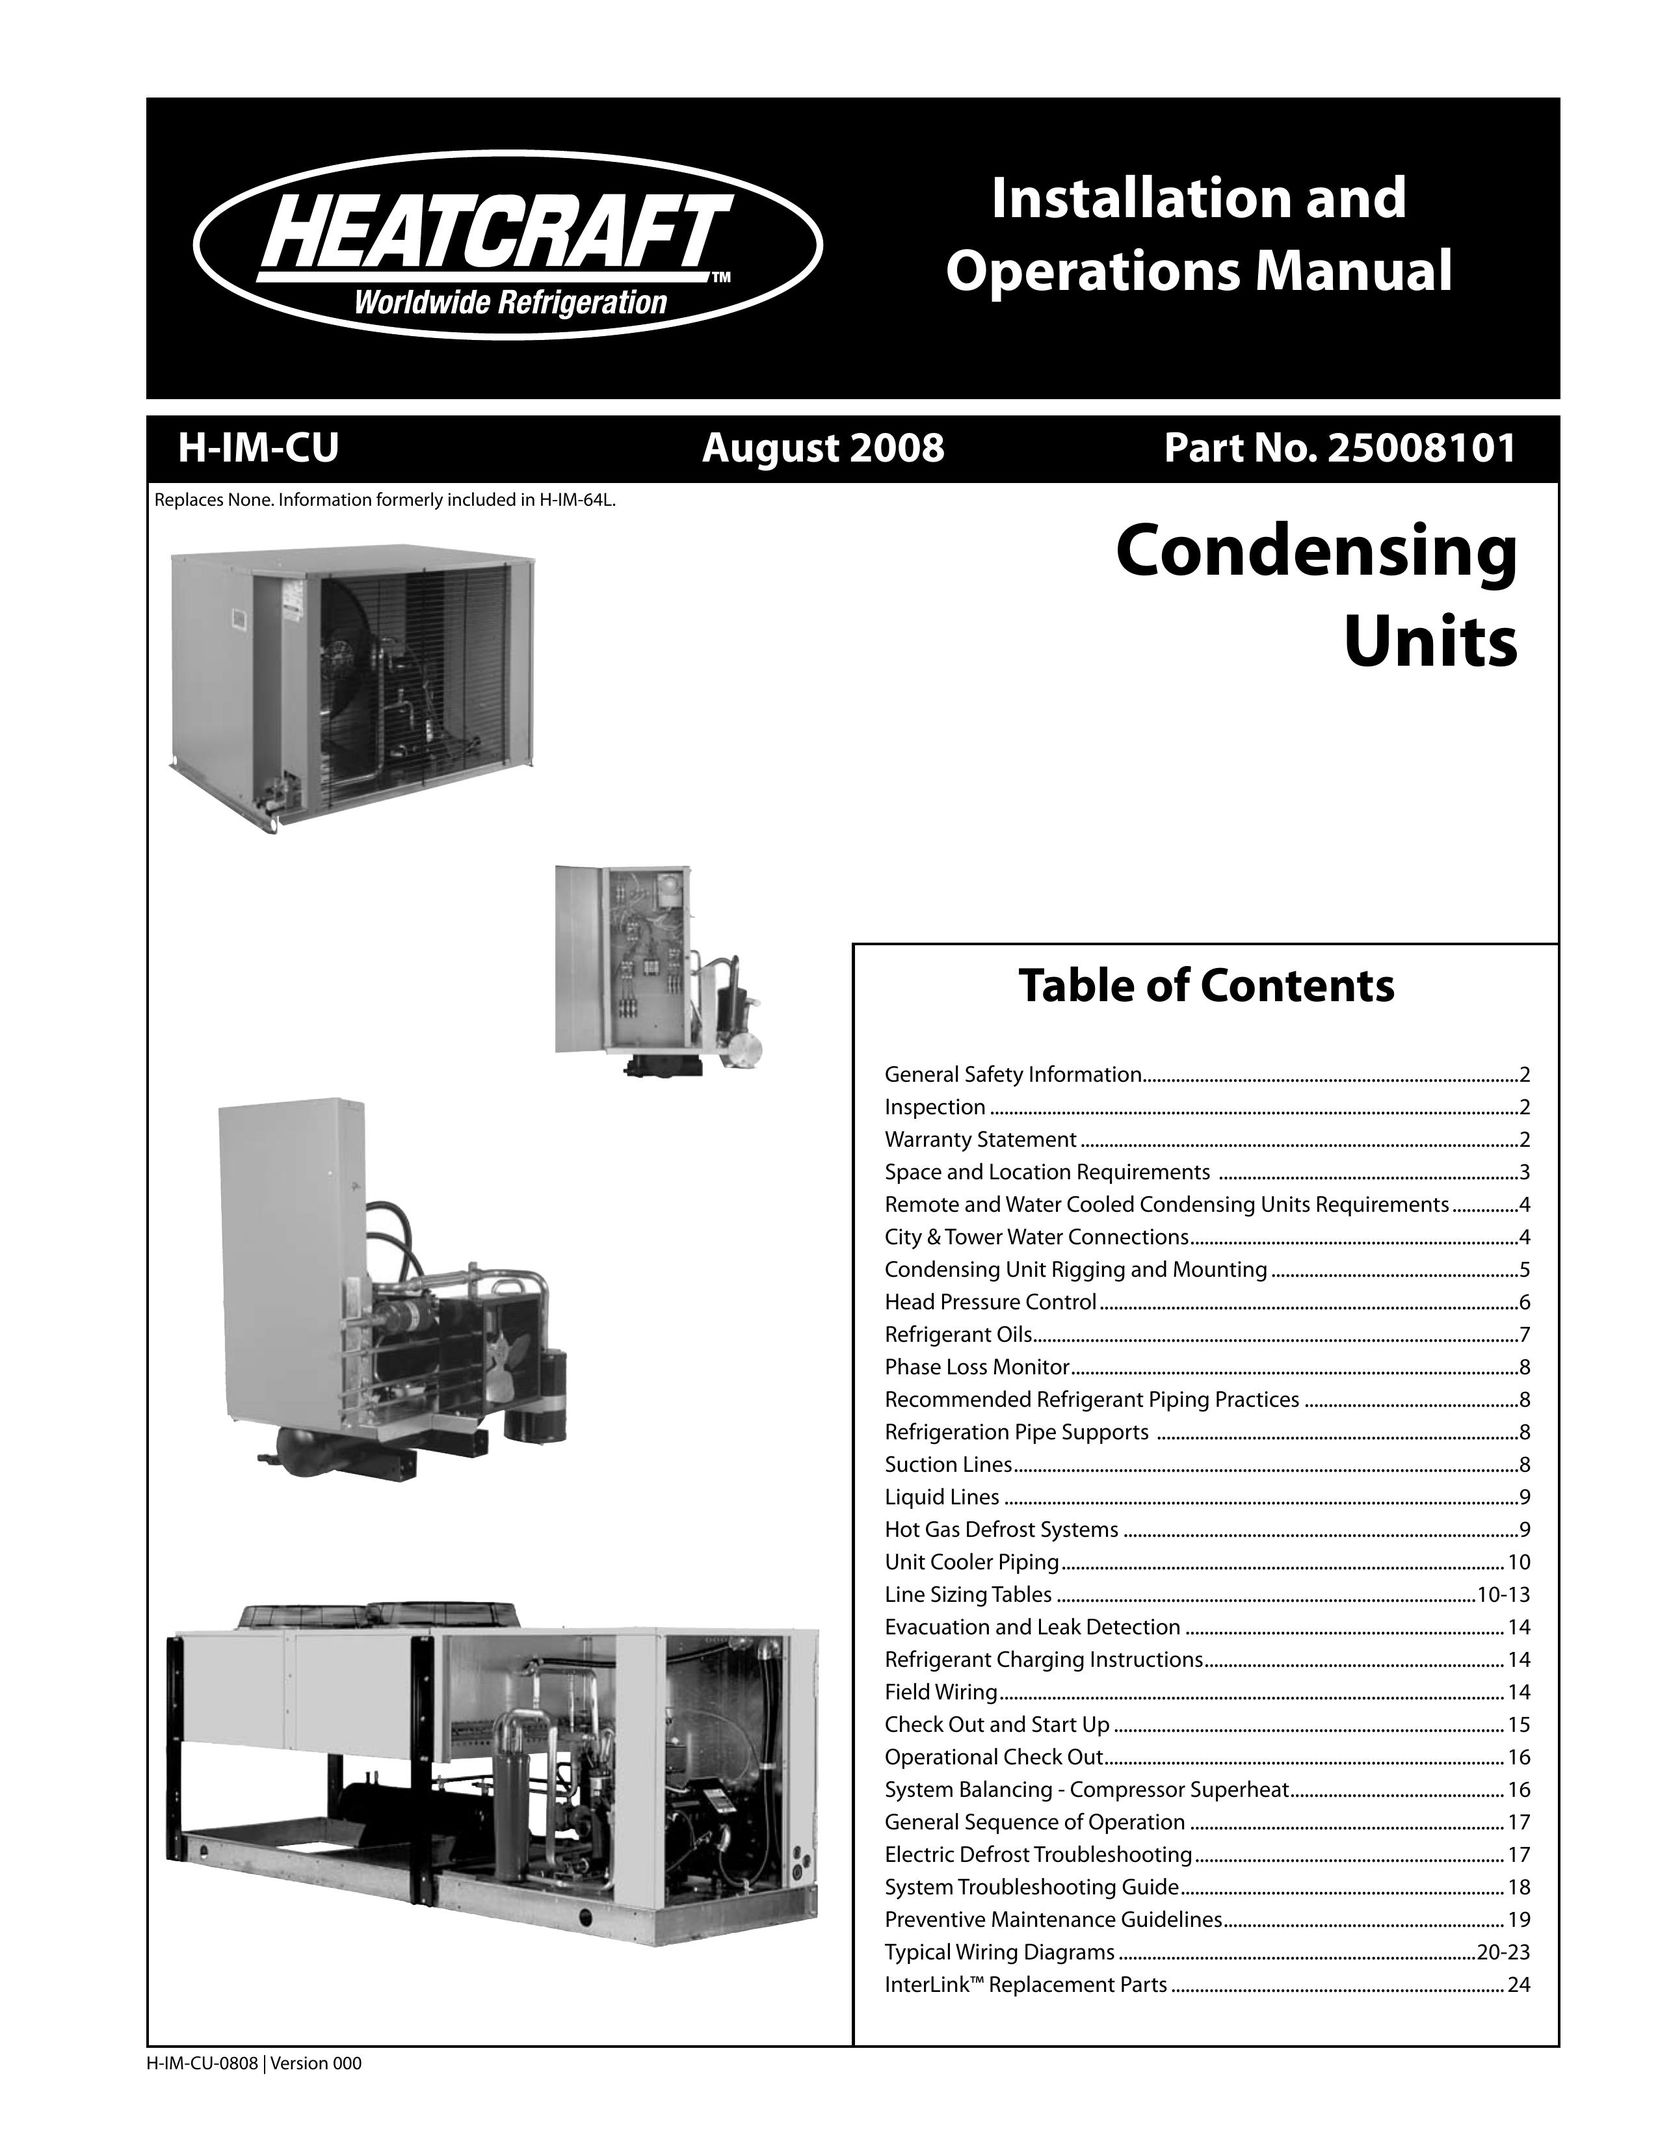 Heatcraft Refrigeration Products H-IM-CU Humidifier User Manual